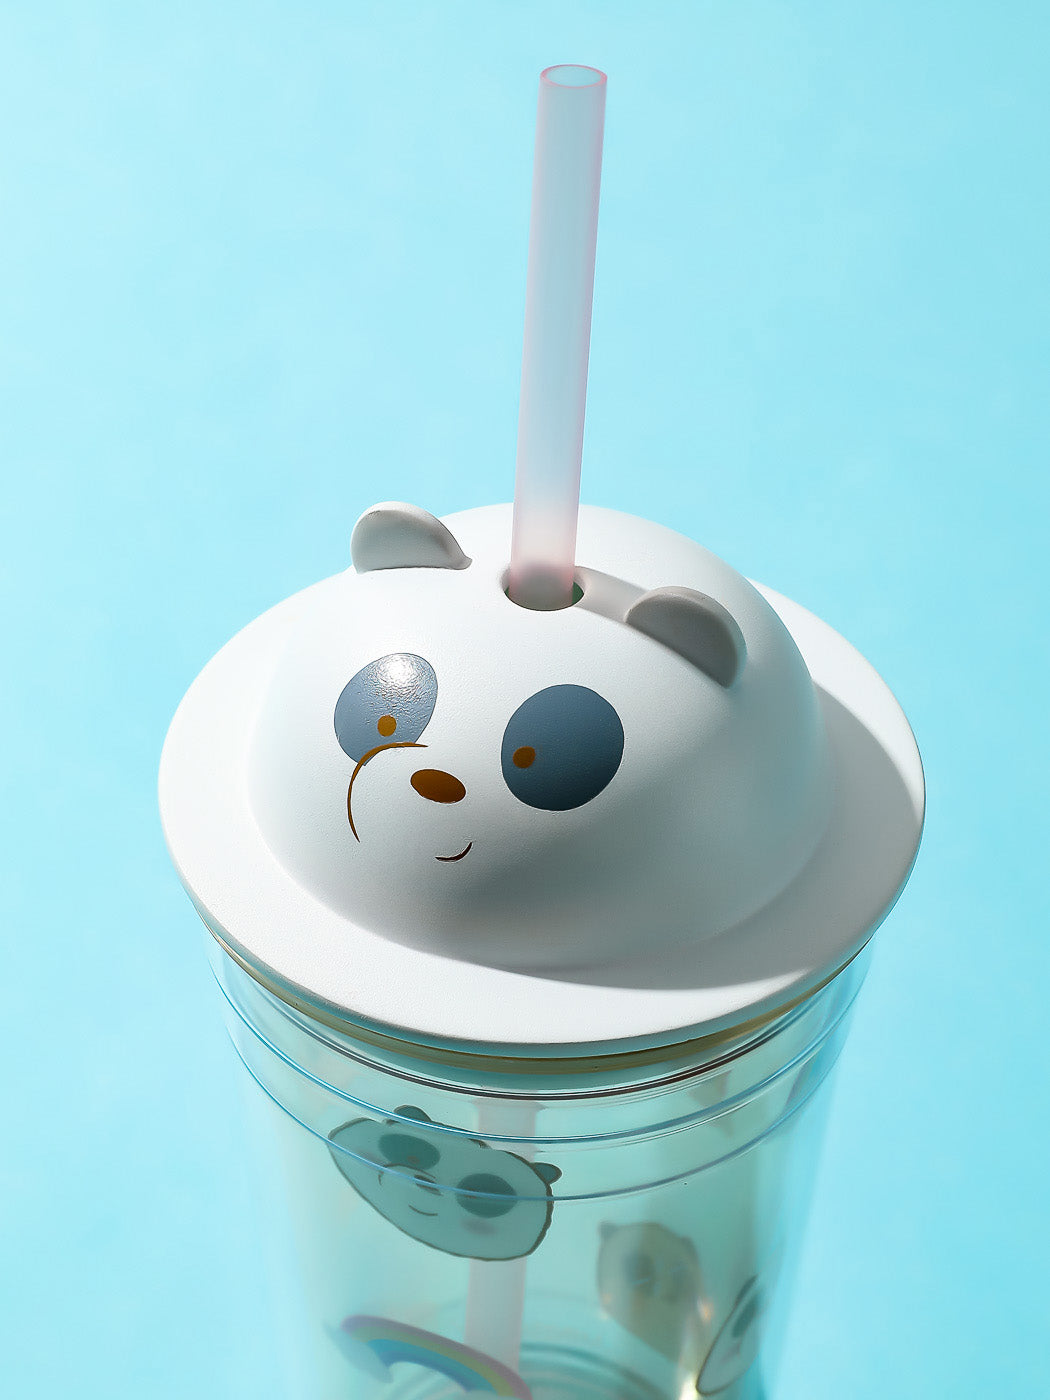 MINISO WE BARE BEARS COLLECTION 4.0 TUMBLER WITH STRAW 440ML(PANDA) 2010863512105 PLASTIC WATER BOTTLE-3